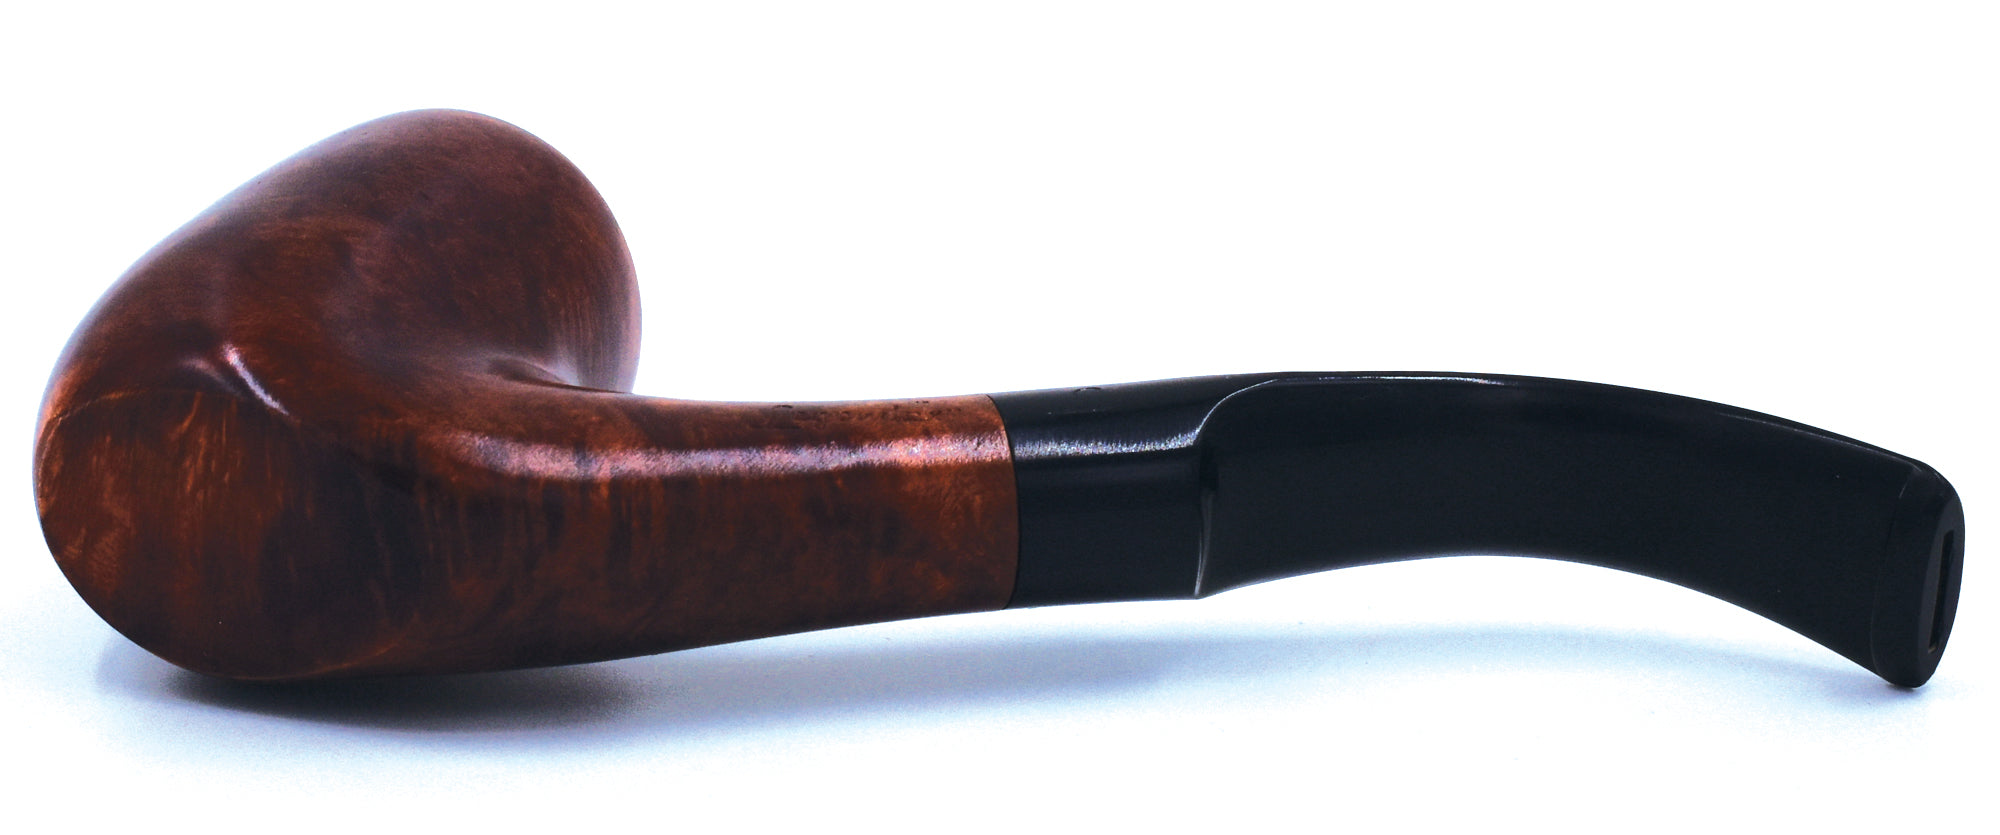 LEGENDEX® LASCALA* 9 MM Filtered Briar Smoking Pipe Made In Italy 01-08-501 Acrylic Series